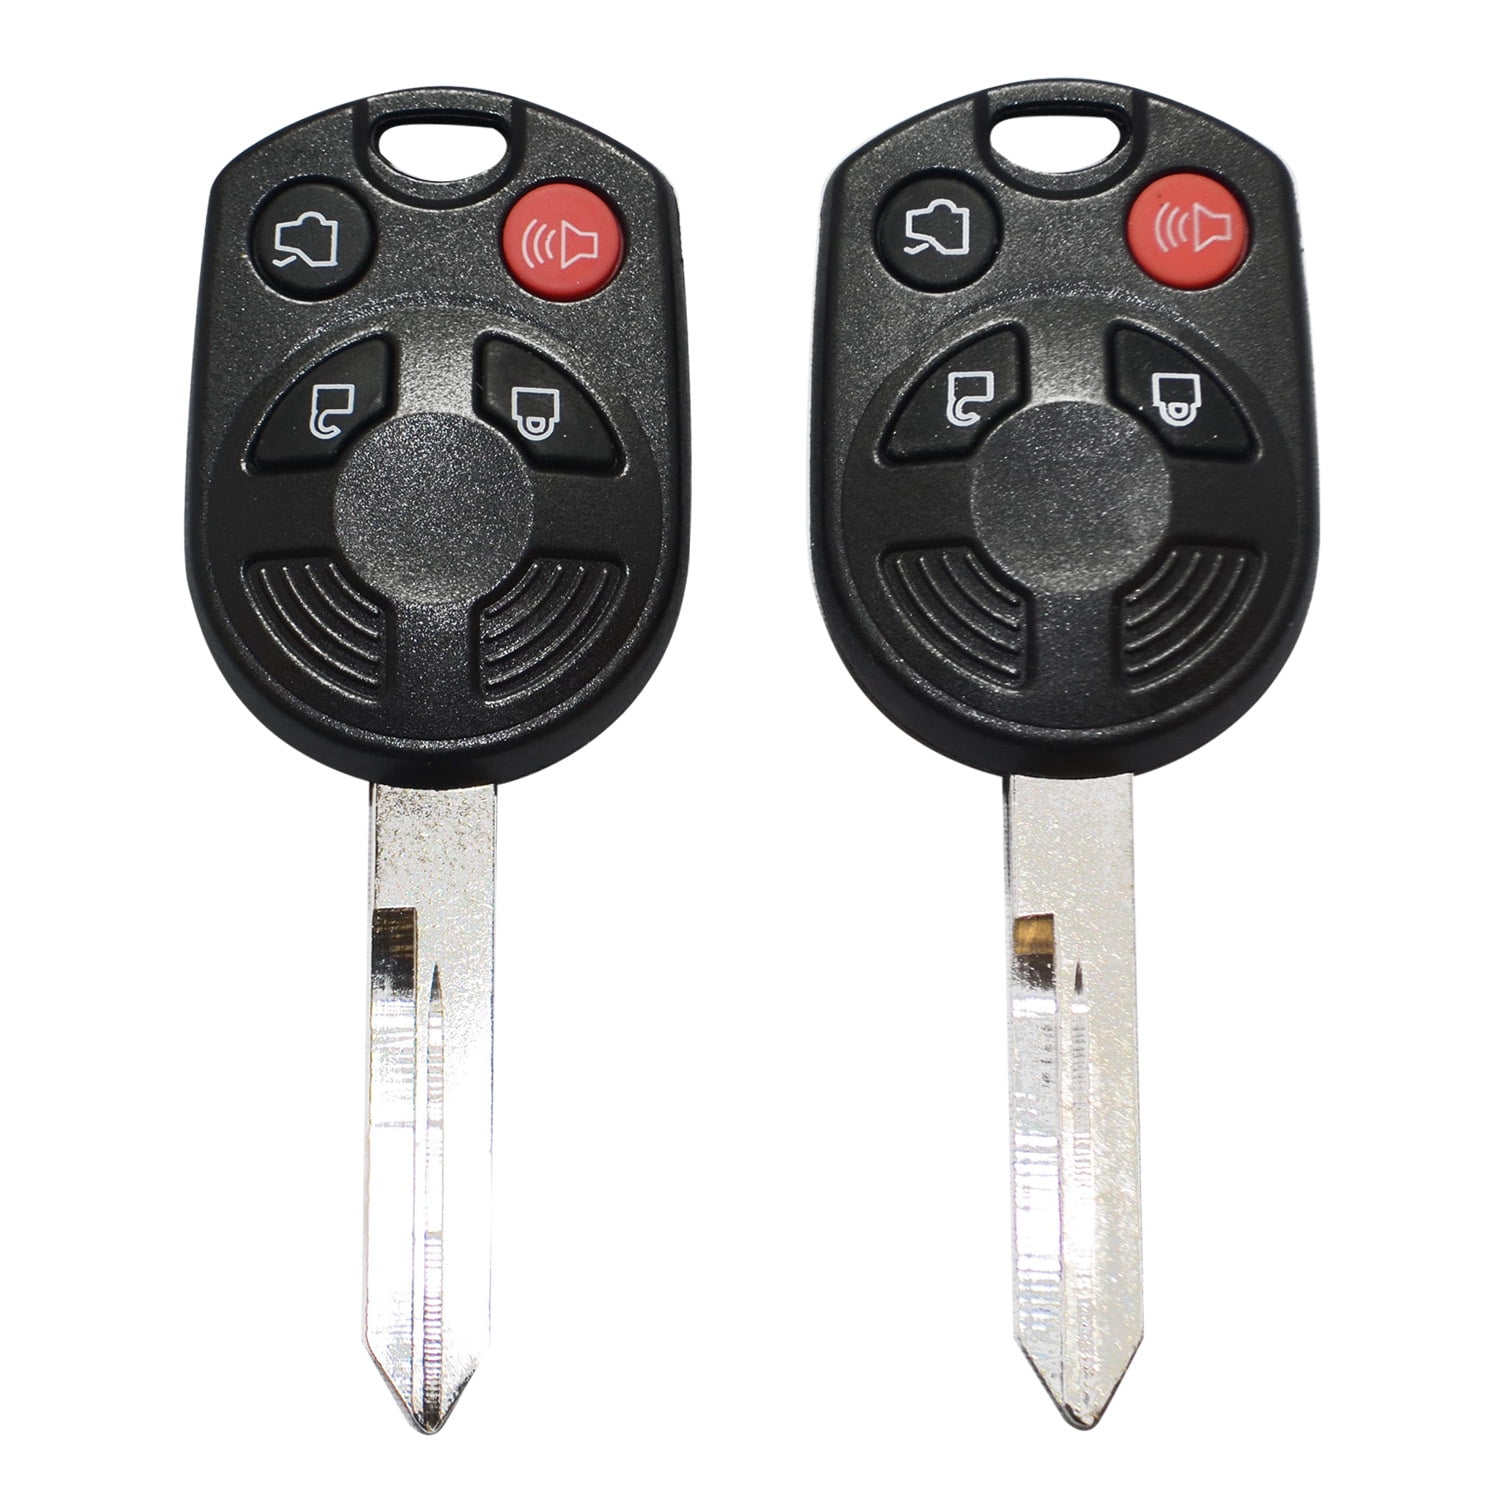 2 Uncut Car Remote Head Ignition Key Keyless Entry For OUCD6000022 Fob 